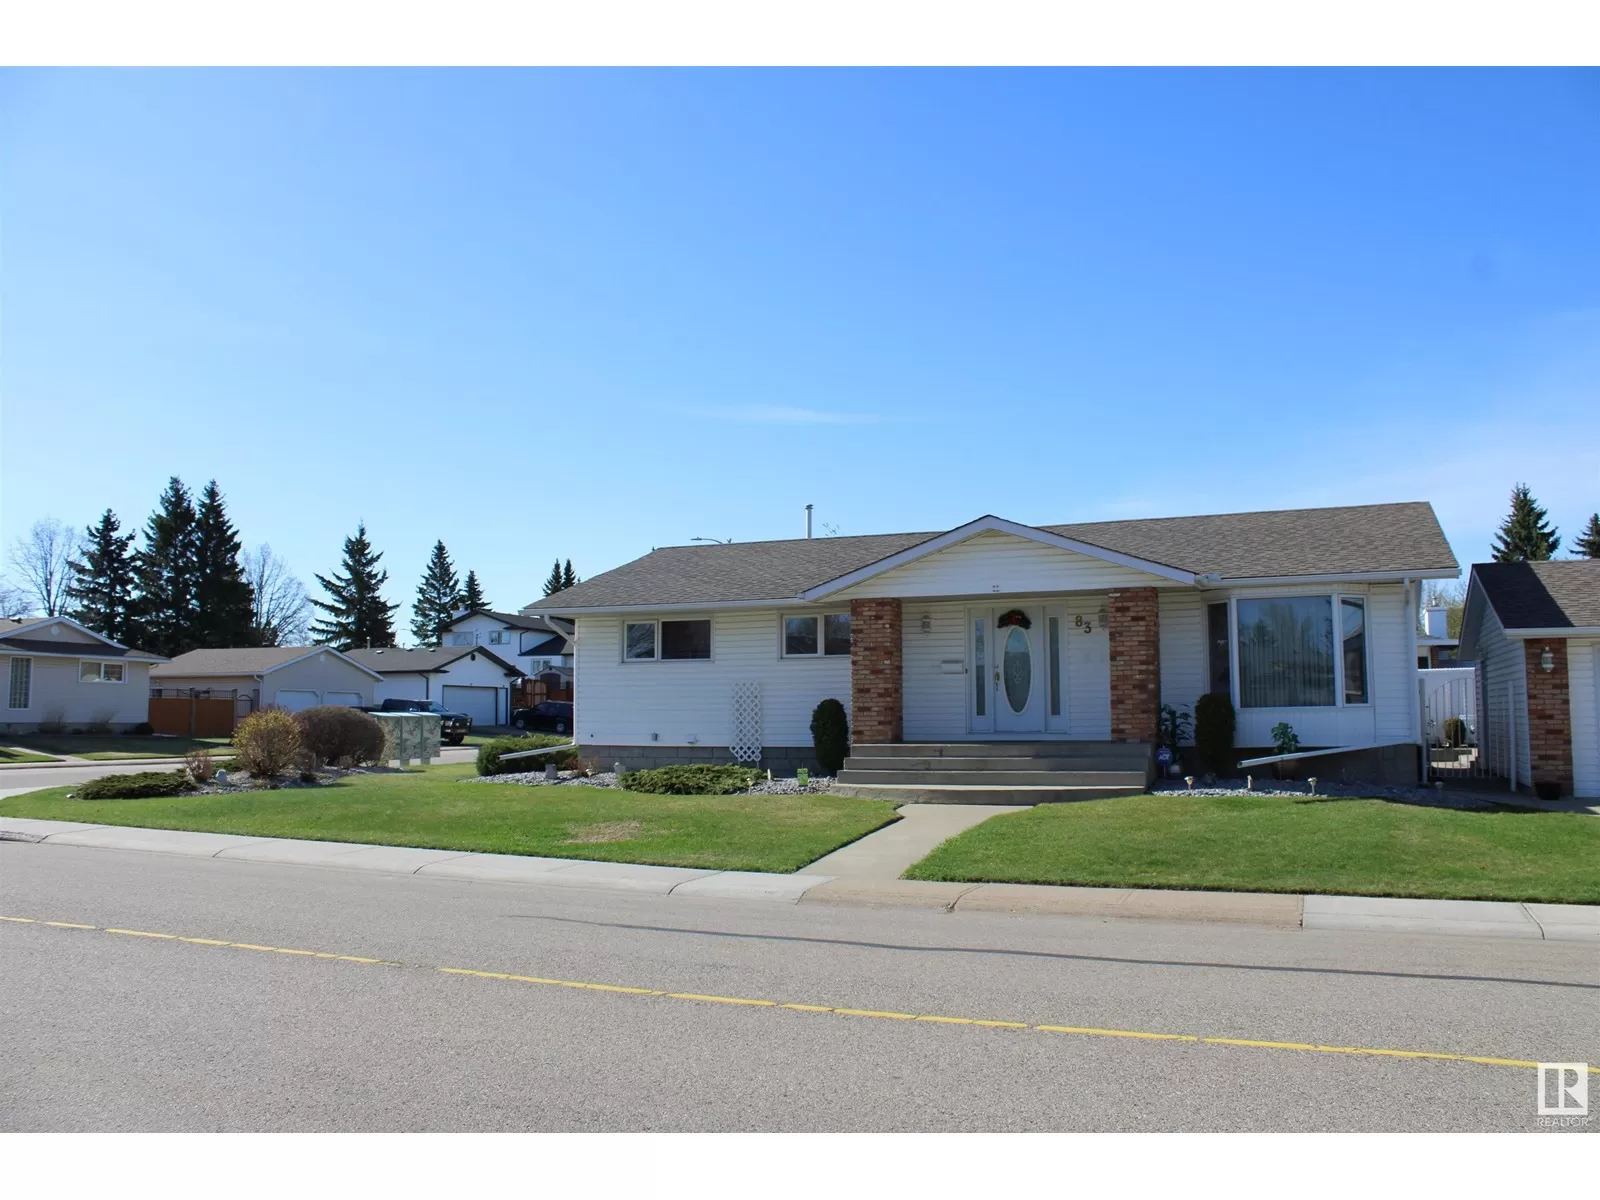 House for rent: 83 Galloway Dr, Sherwood Park, Alberta T8A 2M7